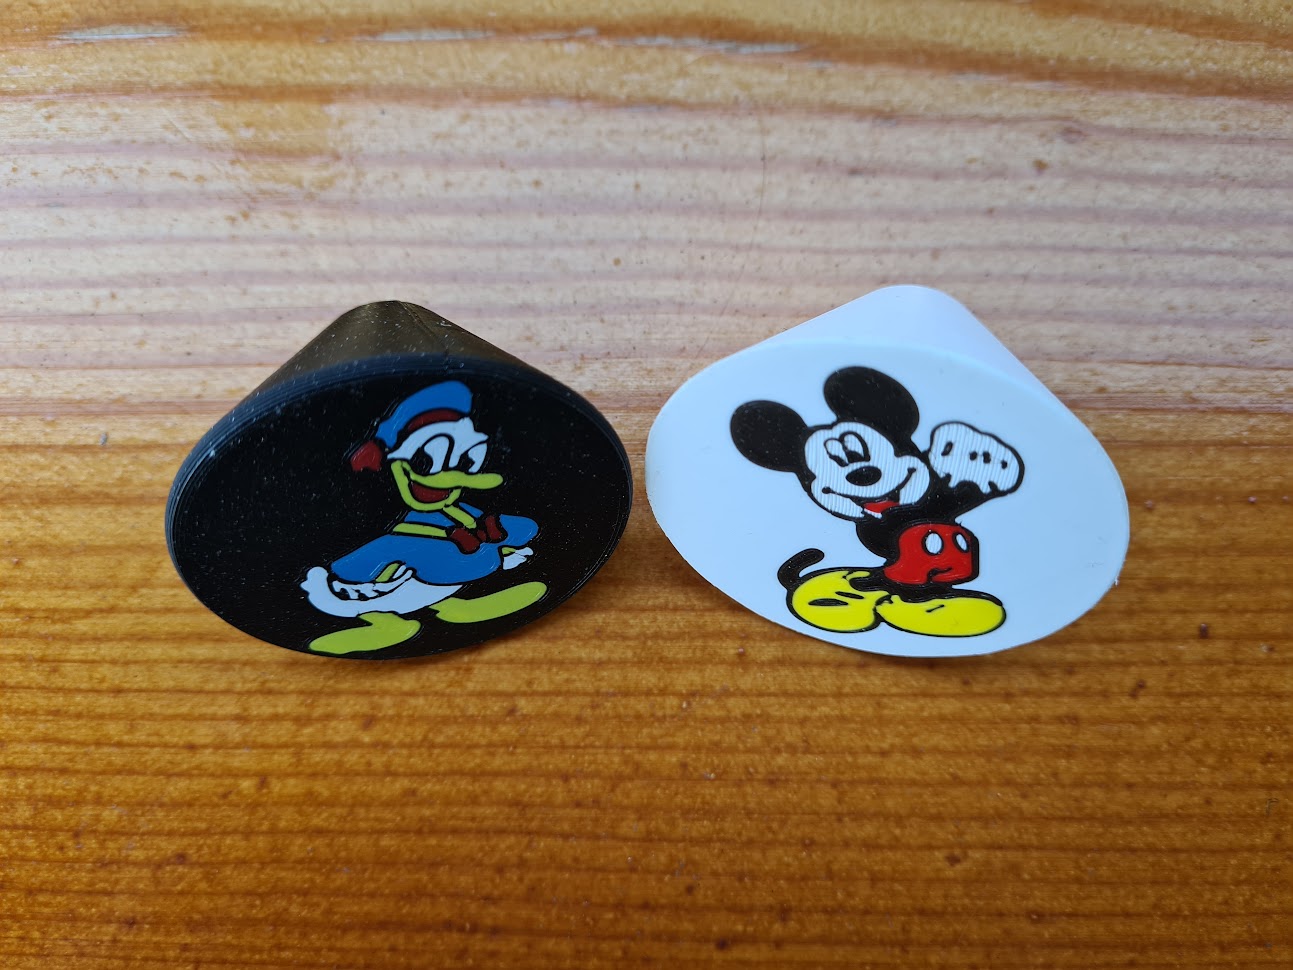 Donald Duck and Mickey Mouse knob